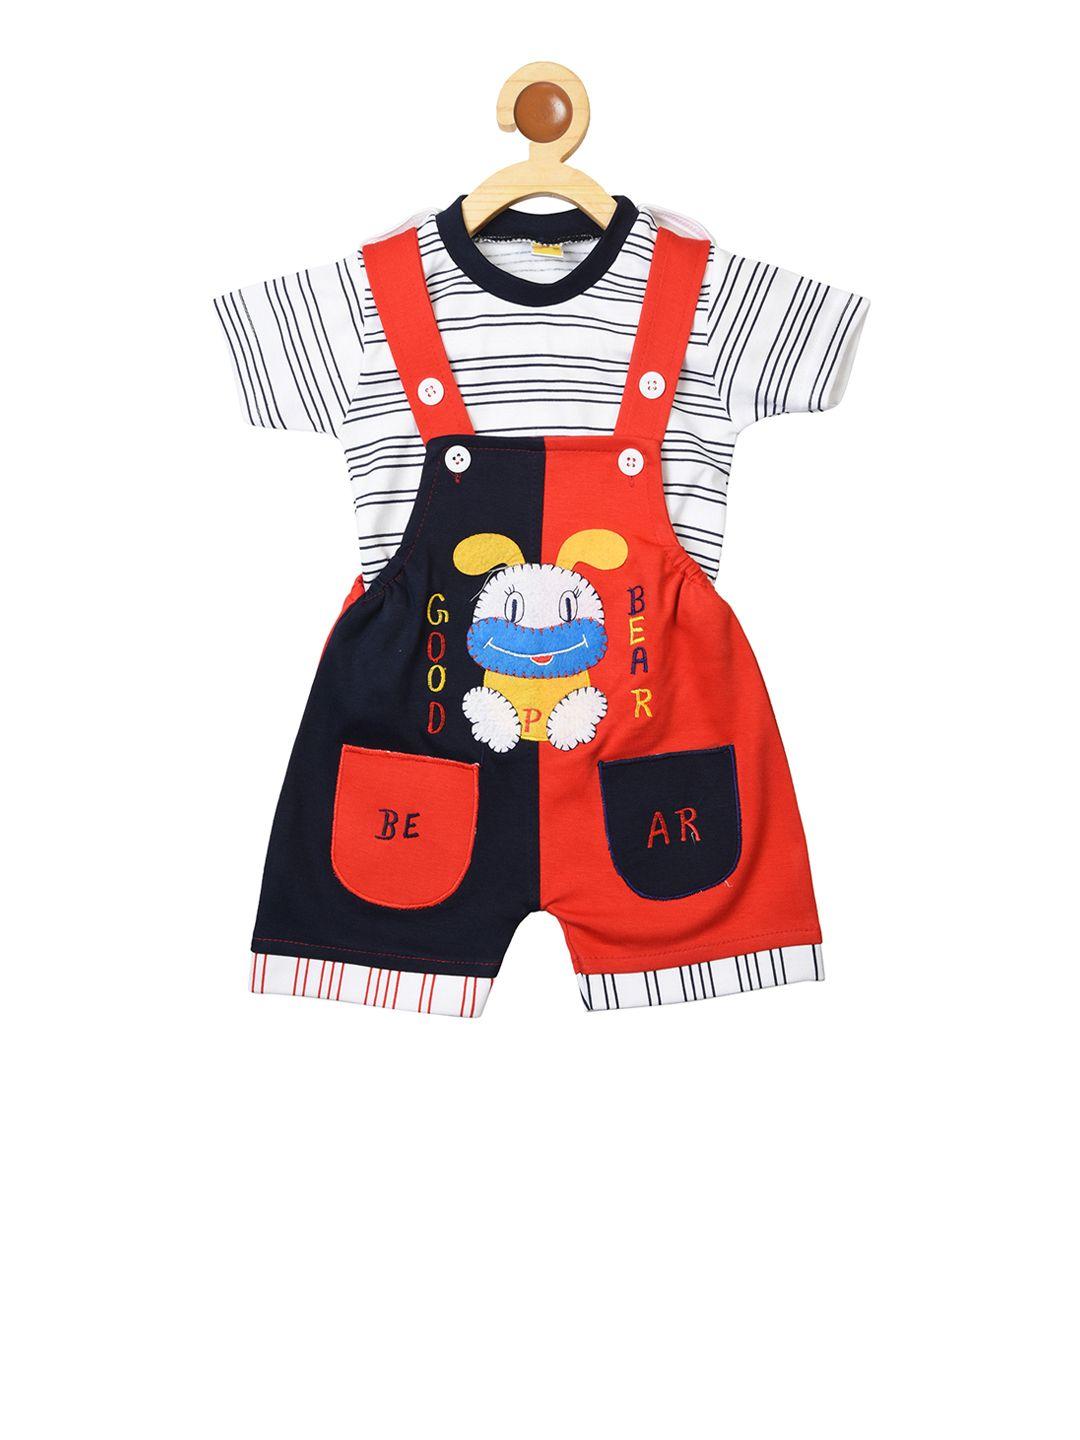 born wear boys navy blue & white striped dungarees